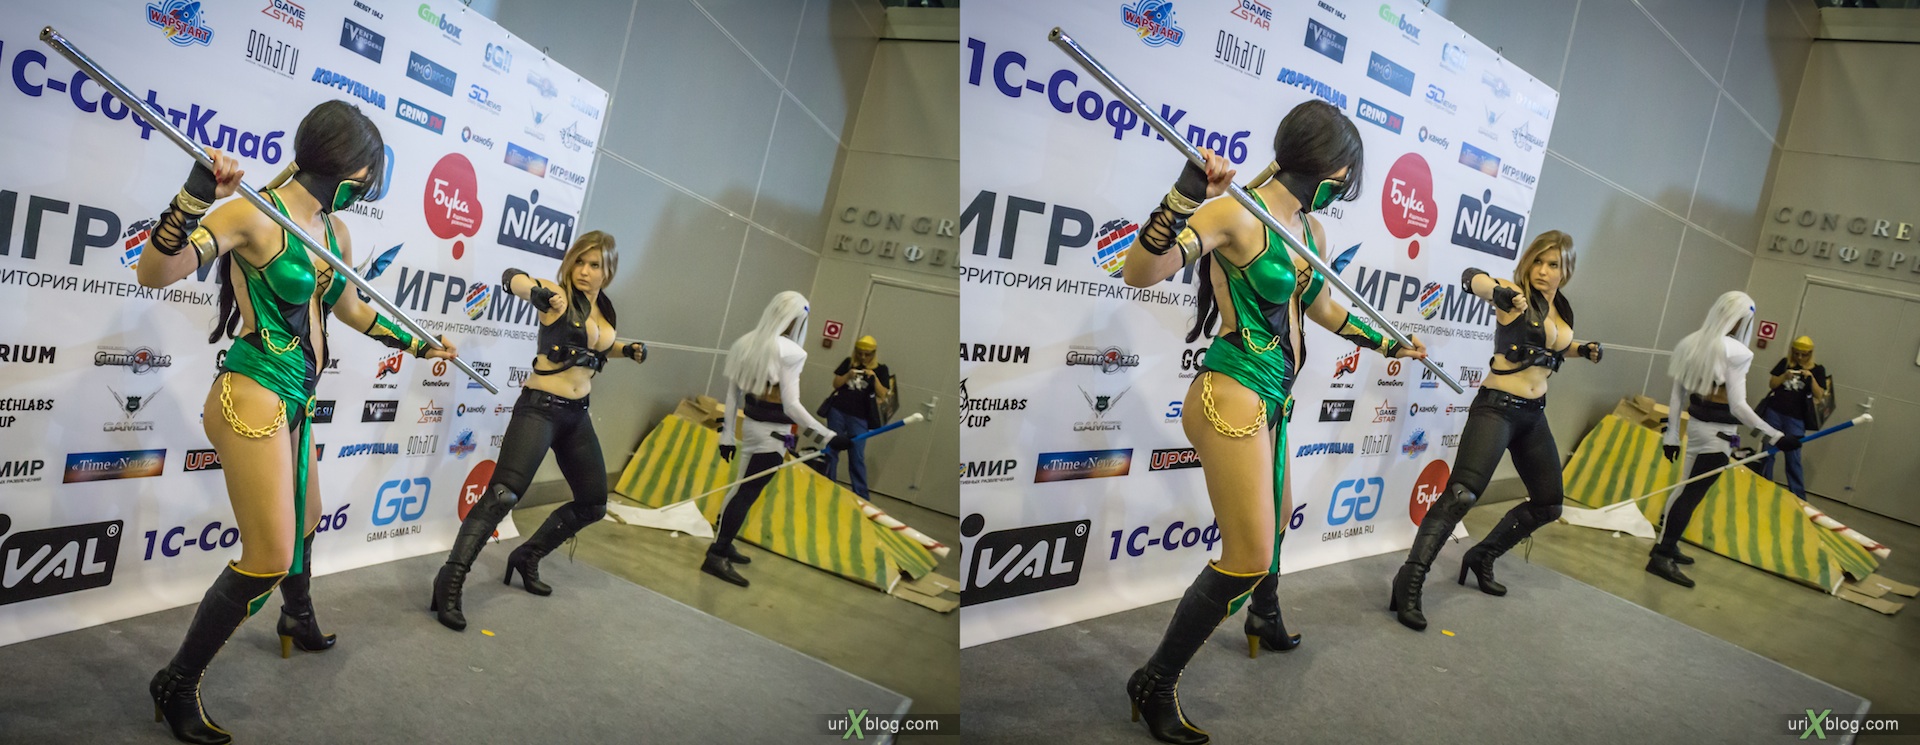 2012, Gameworld 2012 at Moscow, girls, models, Crocus Expo, 3D, stereo pair, cross-eyed, crossview, cross view stereo pair